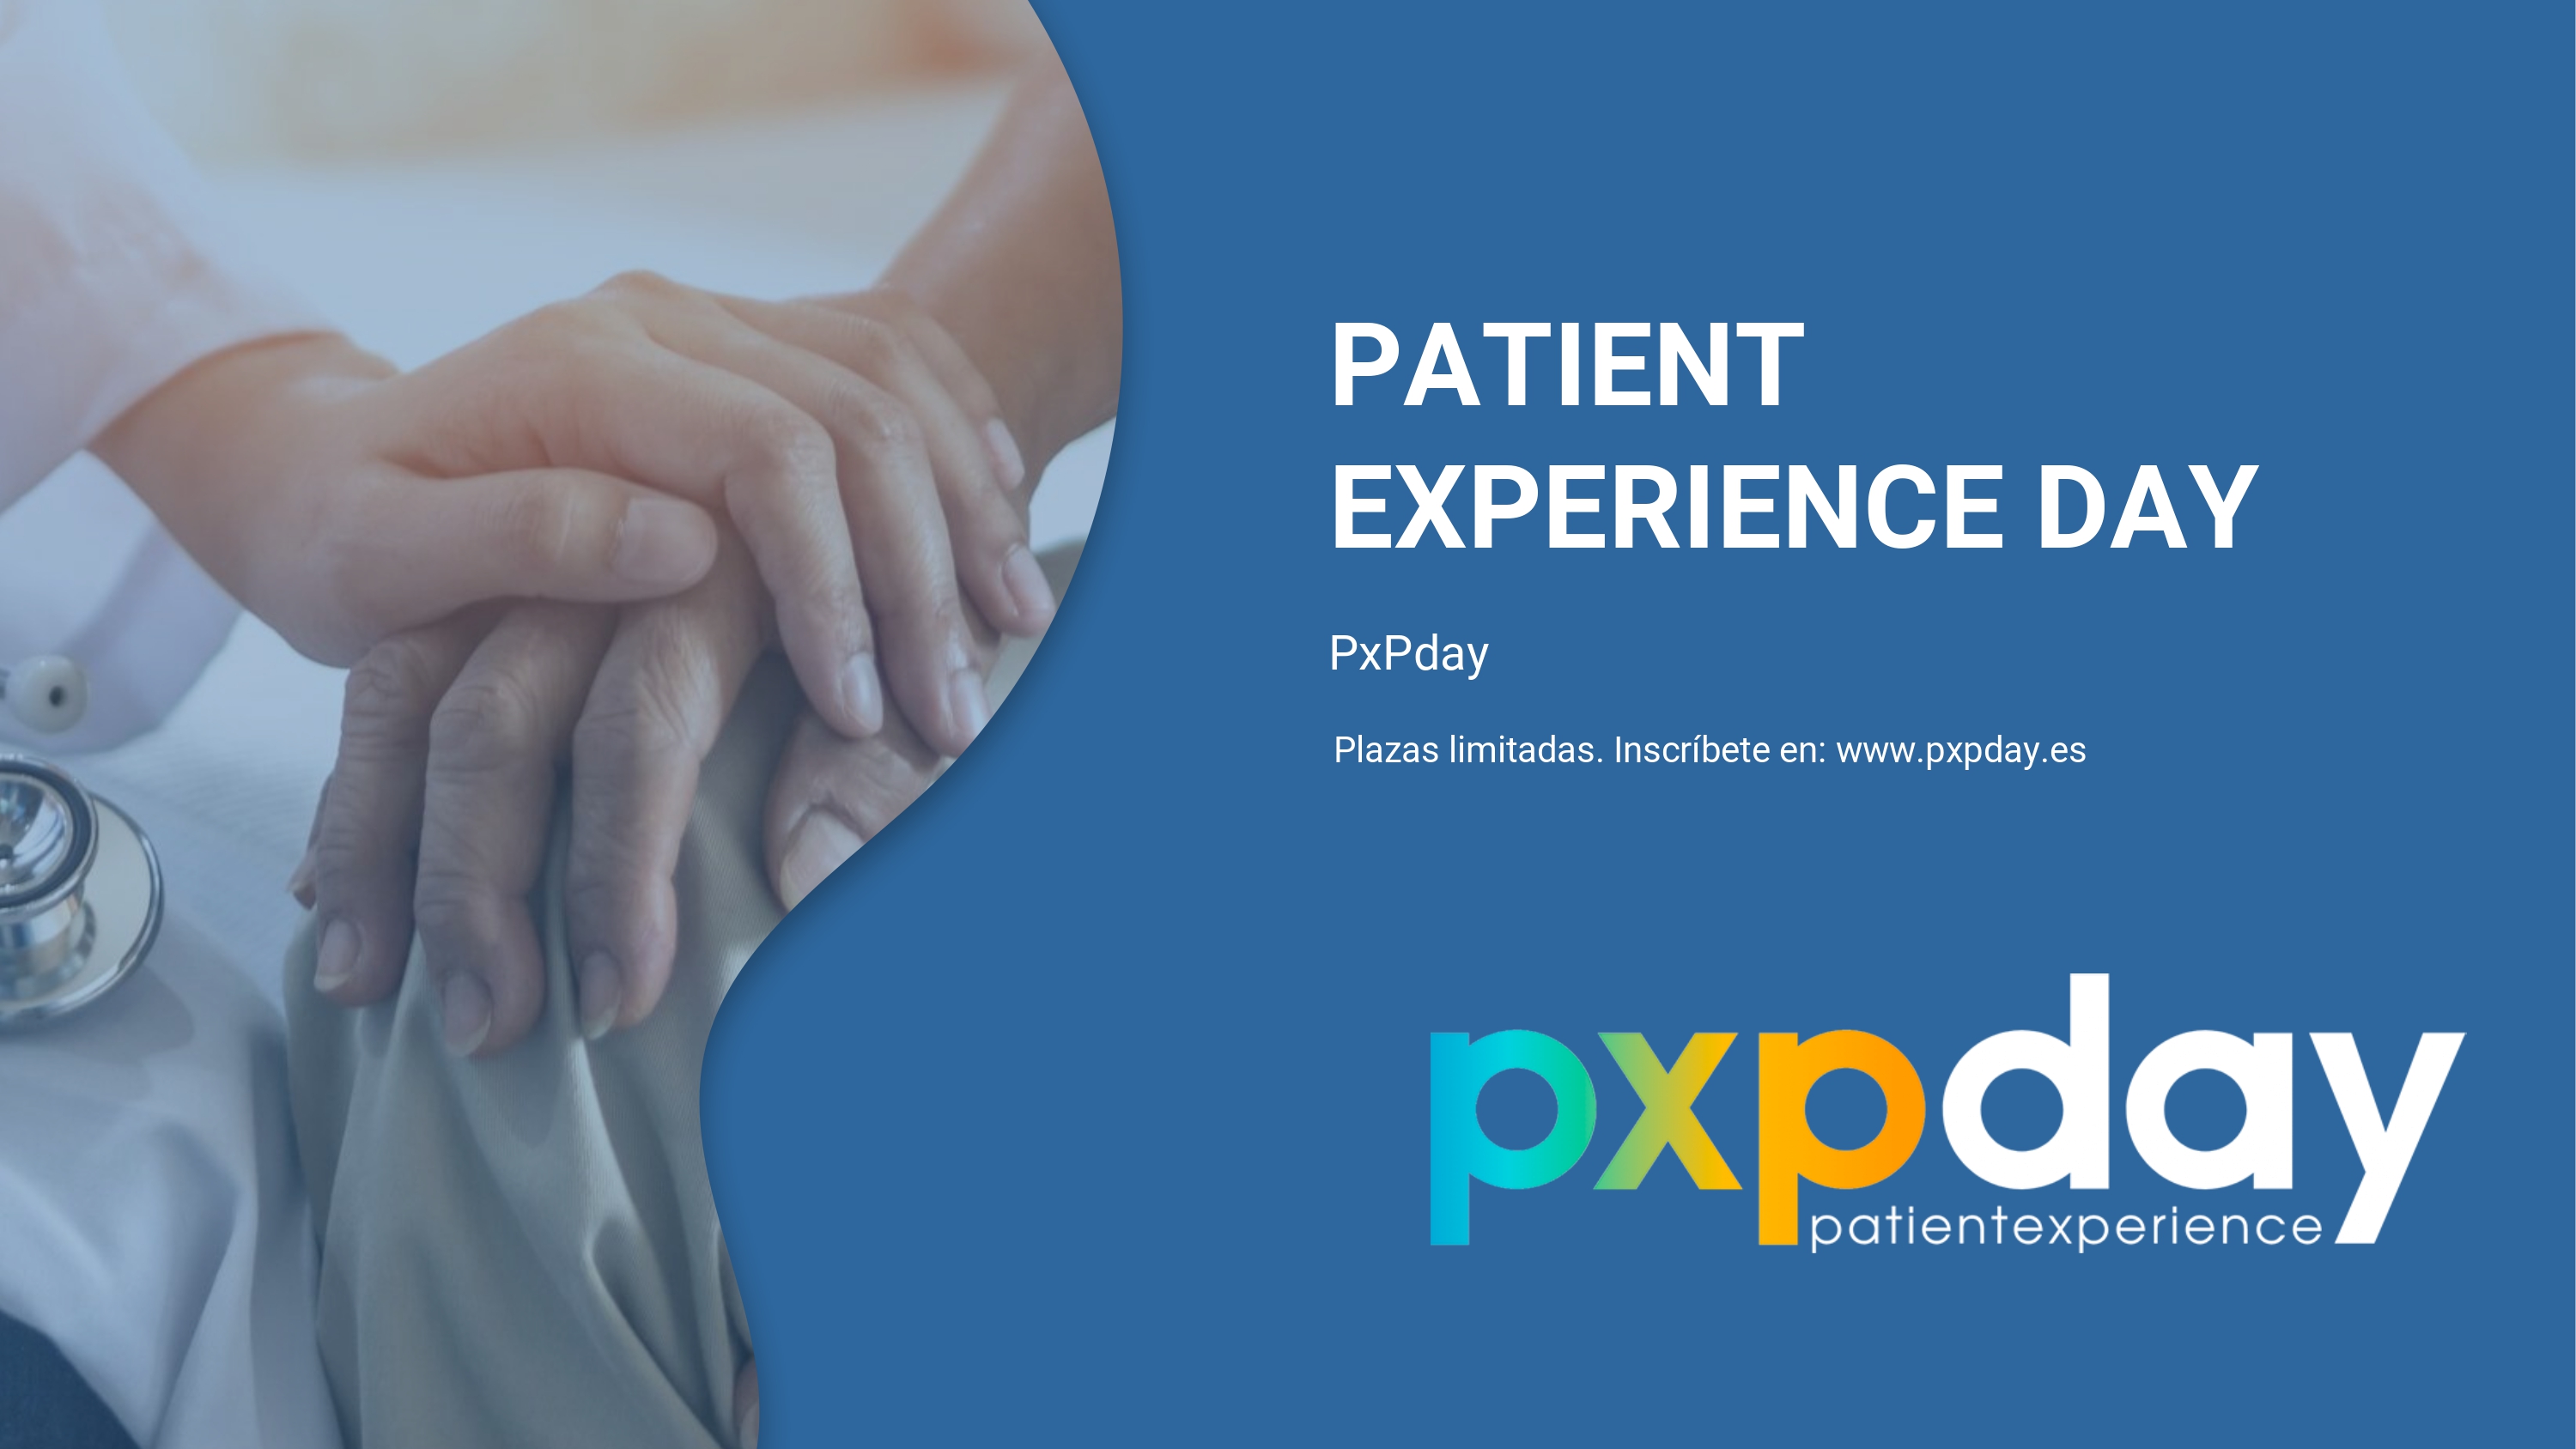 PxPday: Patient Experience Day